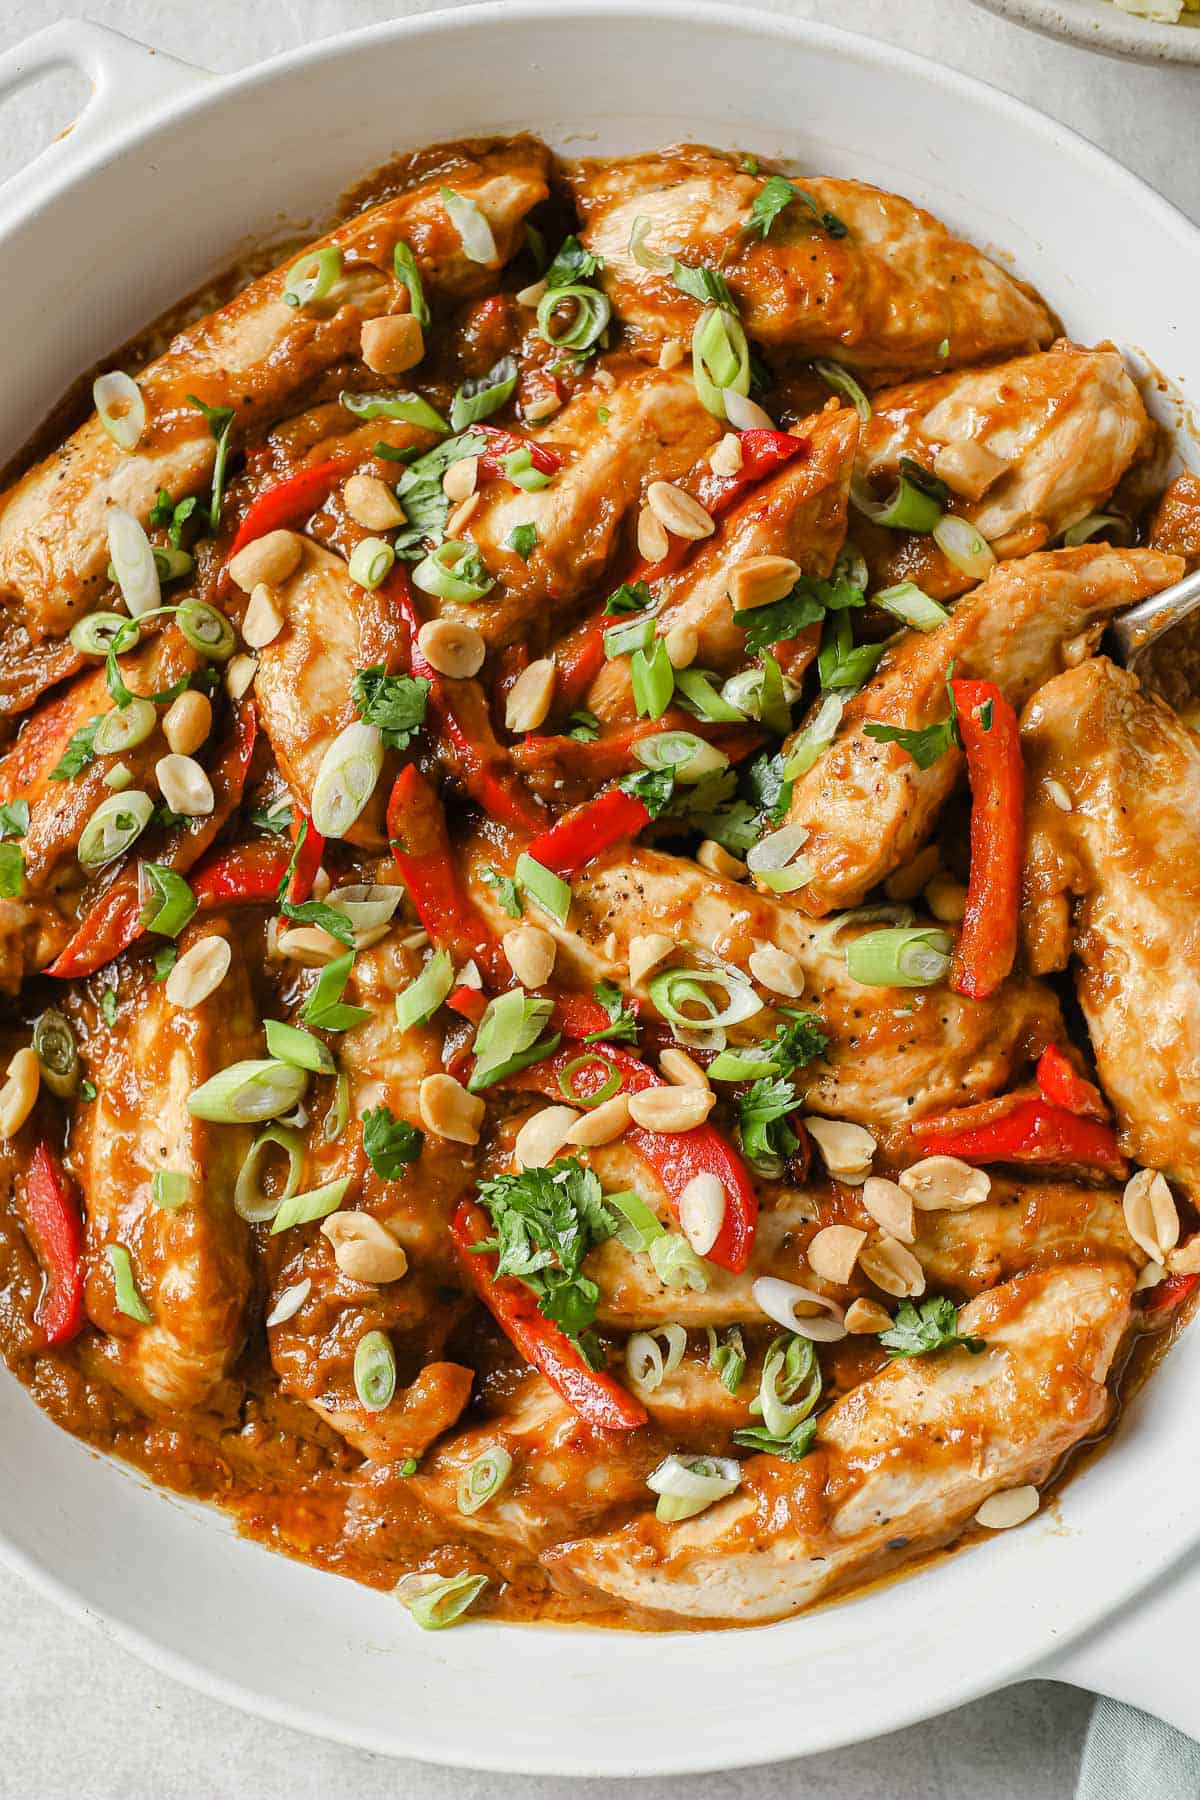 white skillet full of chicken, with a peanut butter sauce, red bell peppers, green onions and cilantro